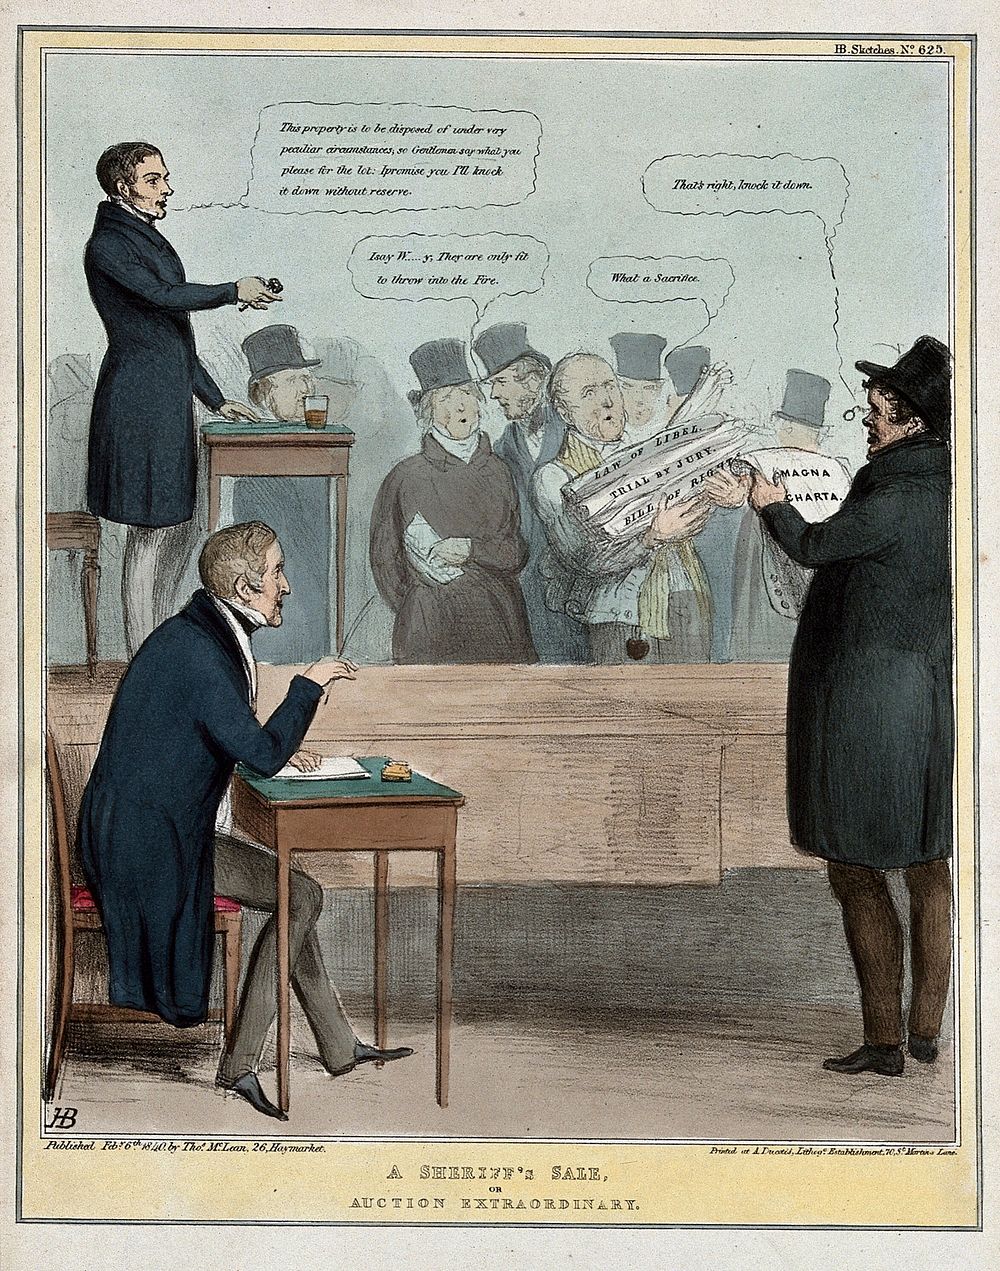 Lord John Russell, as an auctioneer with Sir Robert Peel as his clerk, auction a bundle of papers inscribed "law of libel"…